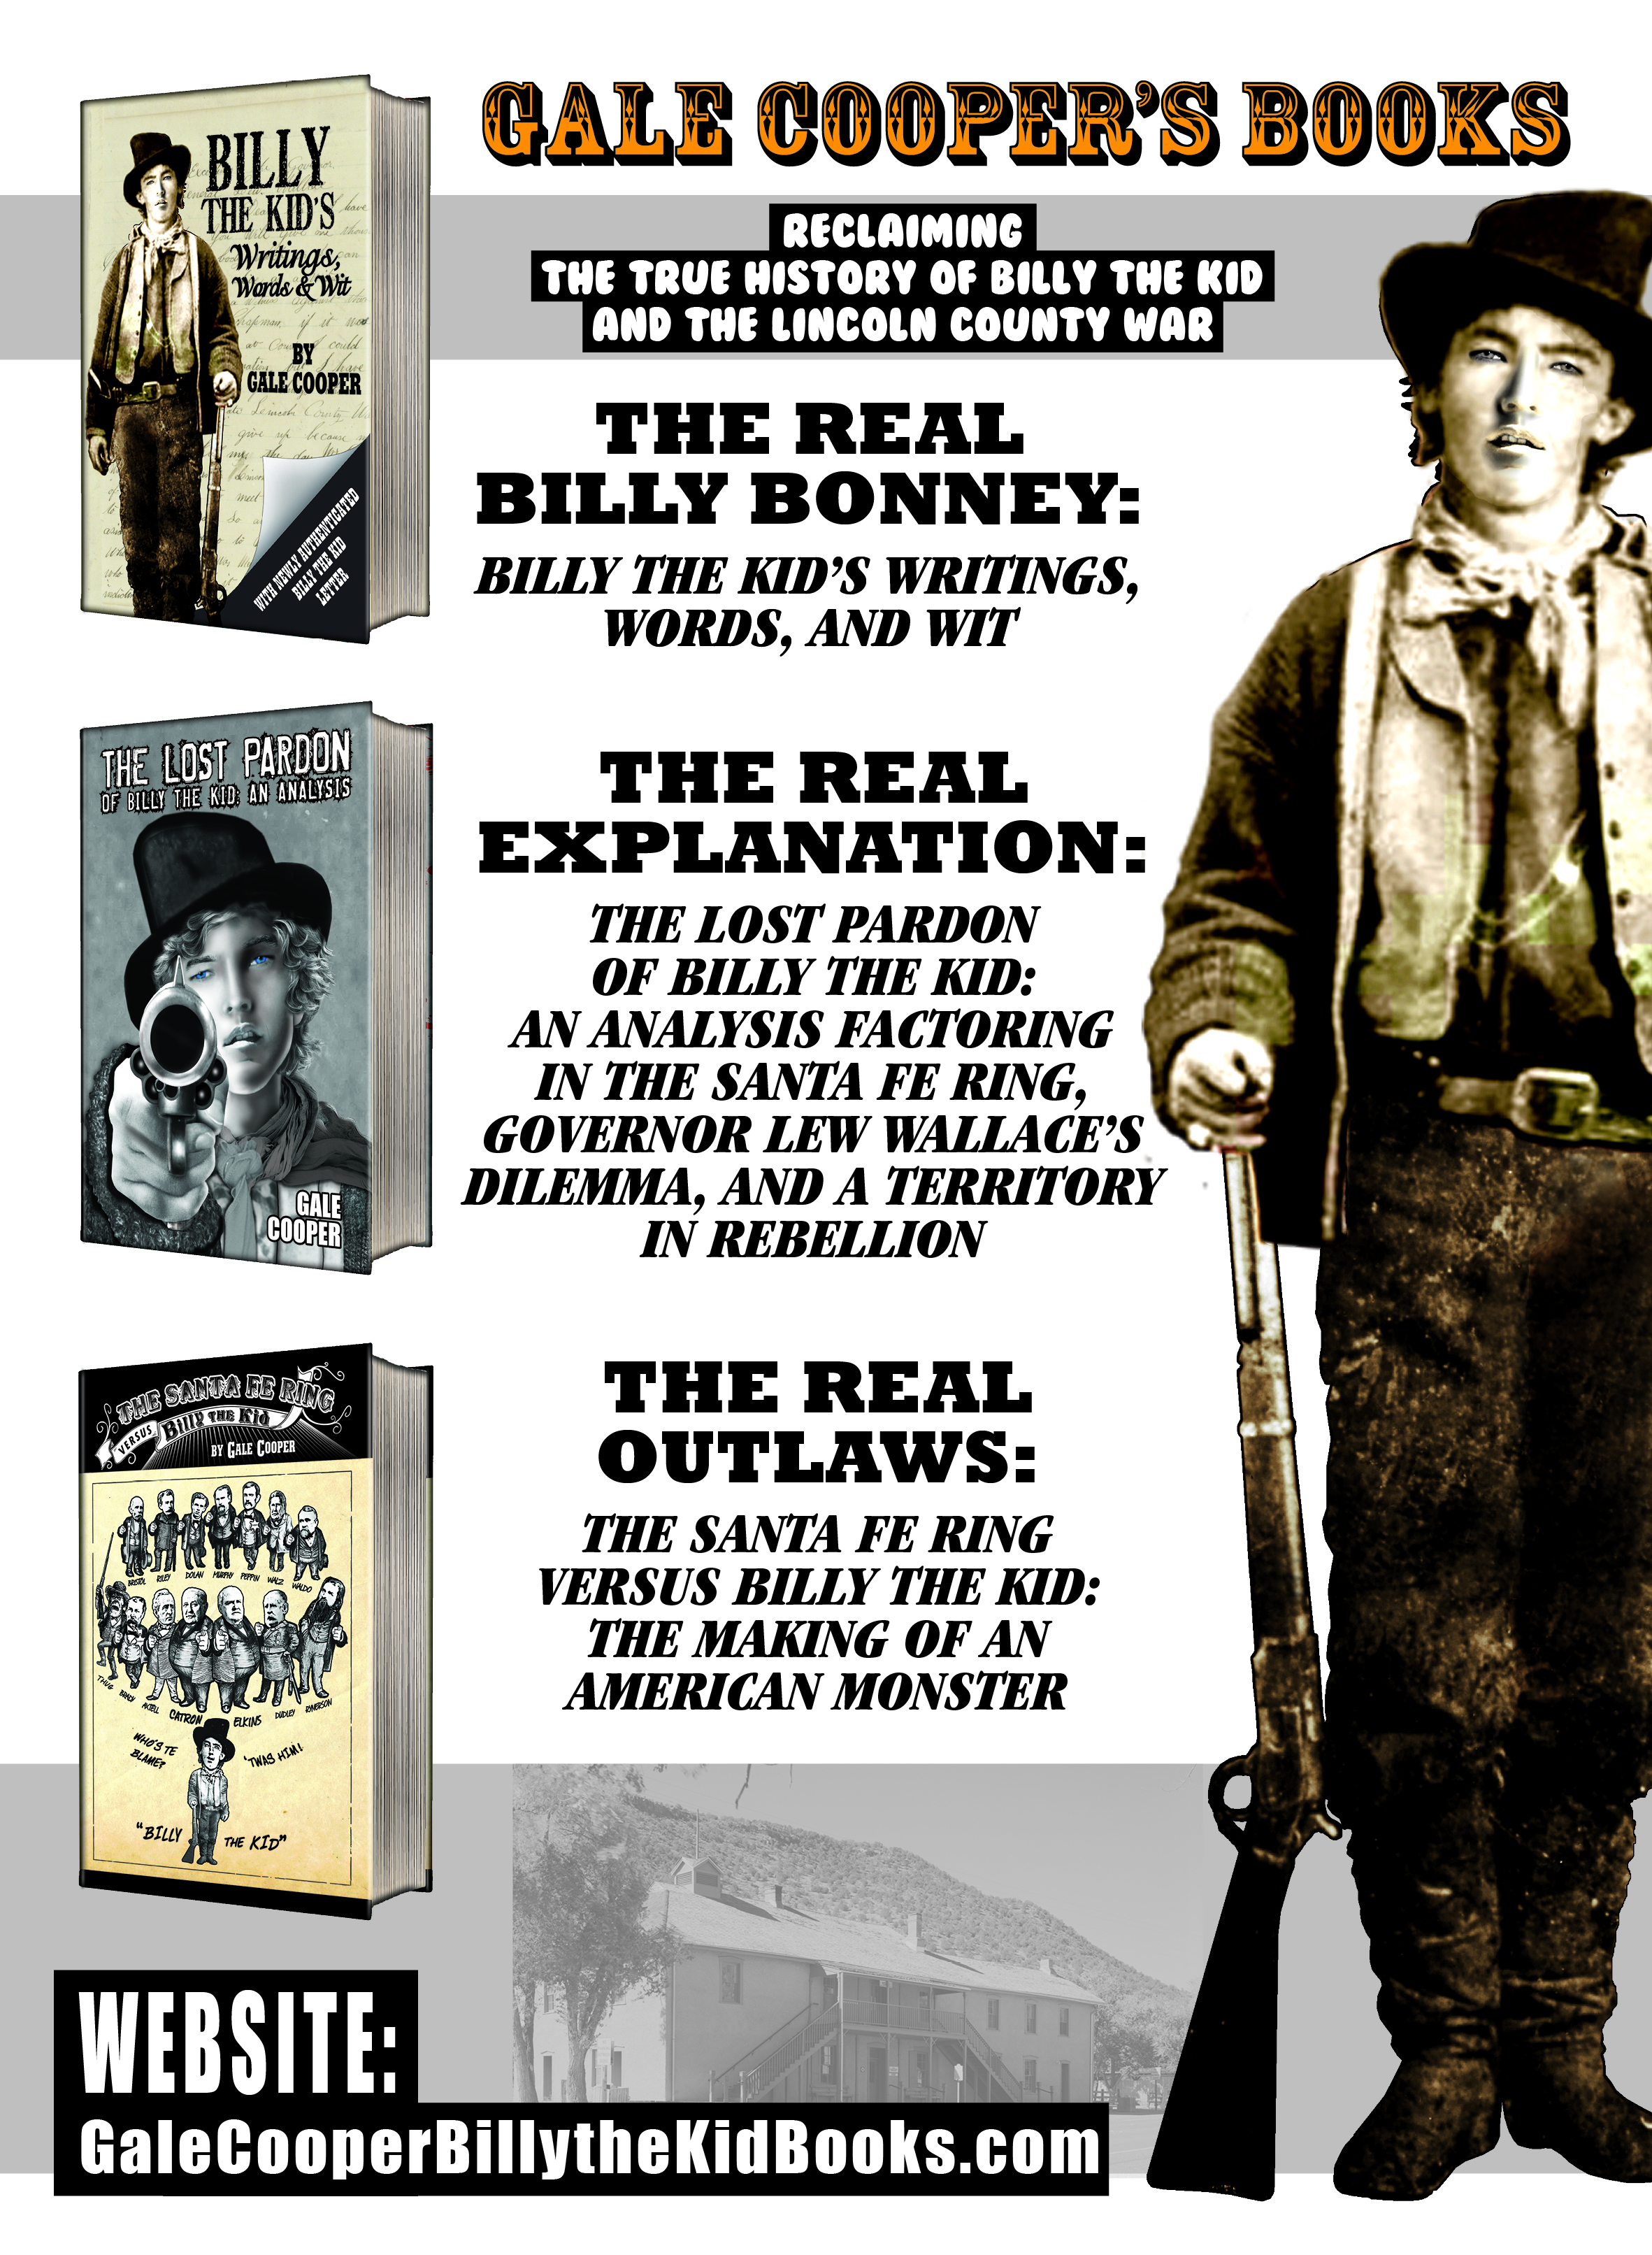 Gale Cooper's Books: Reclaiming the true history of Billy the Kid and the Lincoln County War